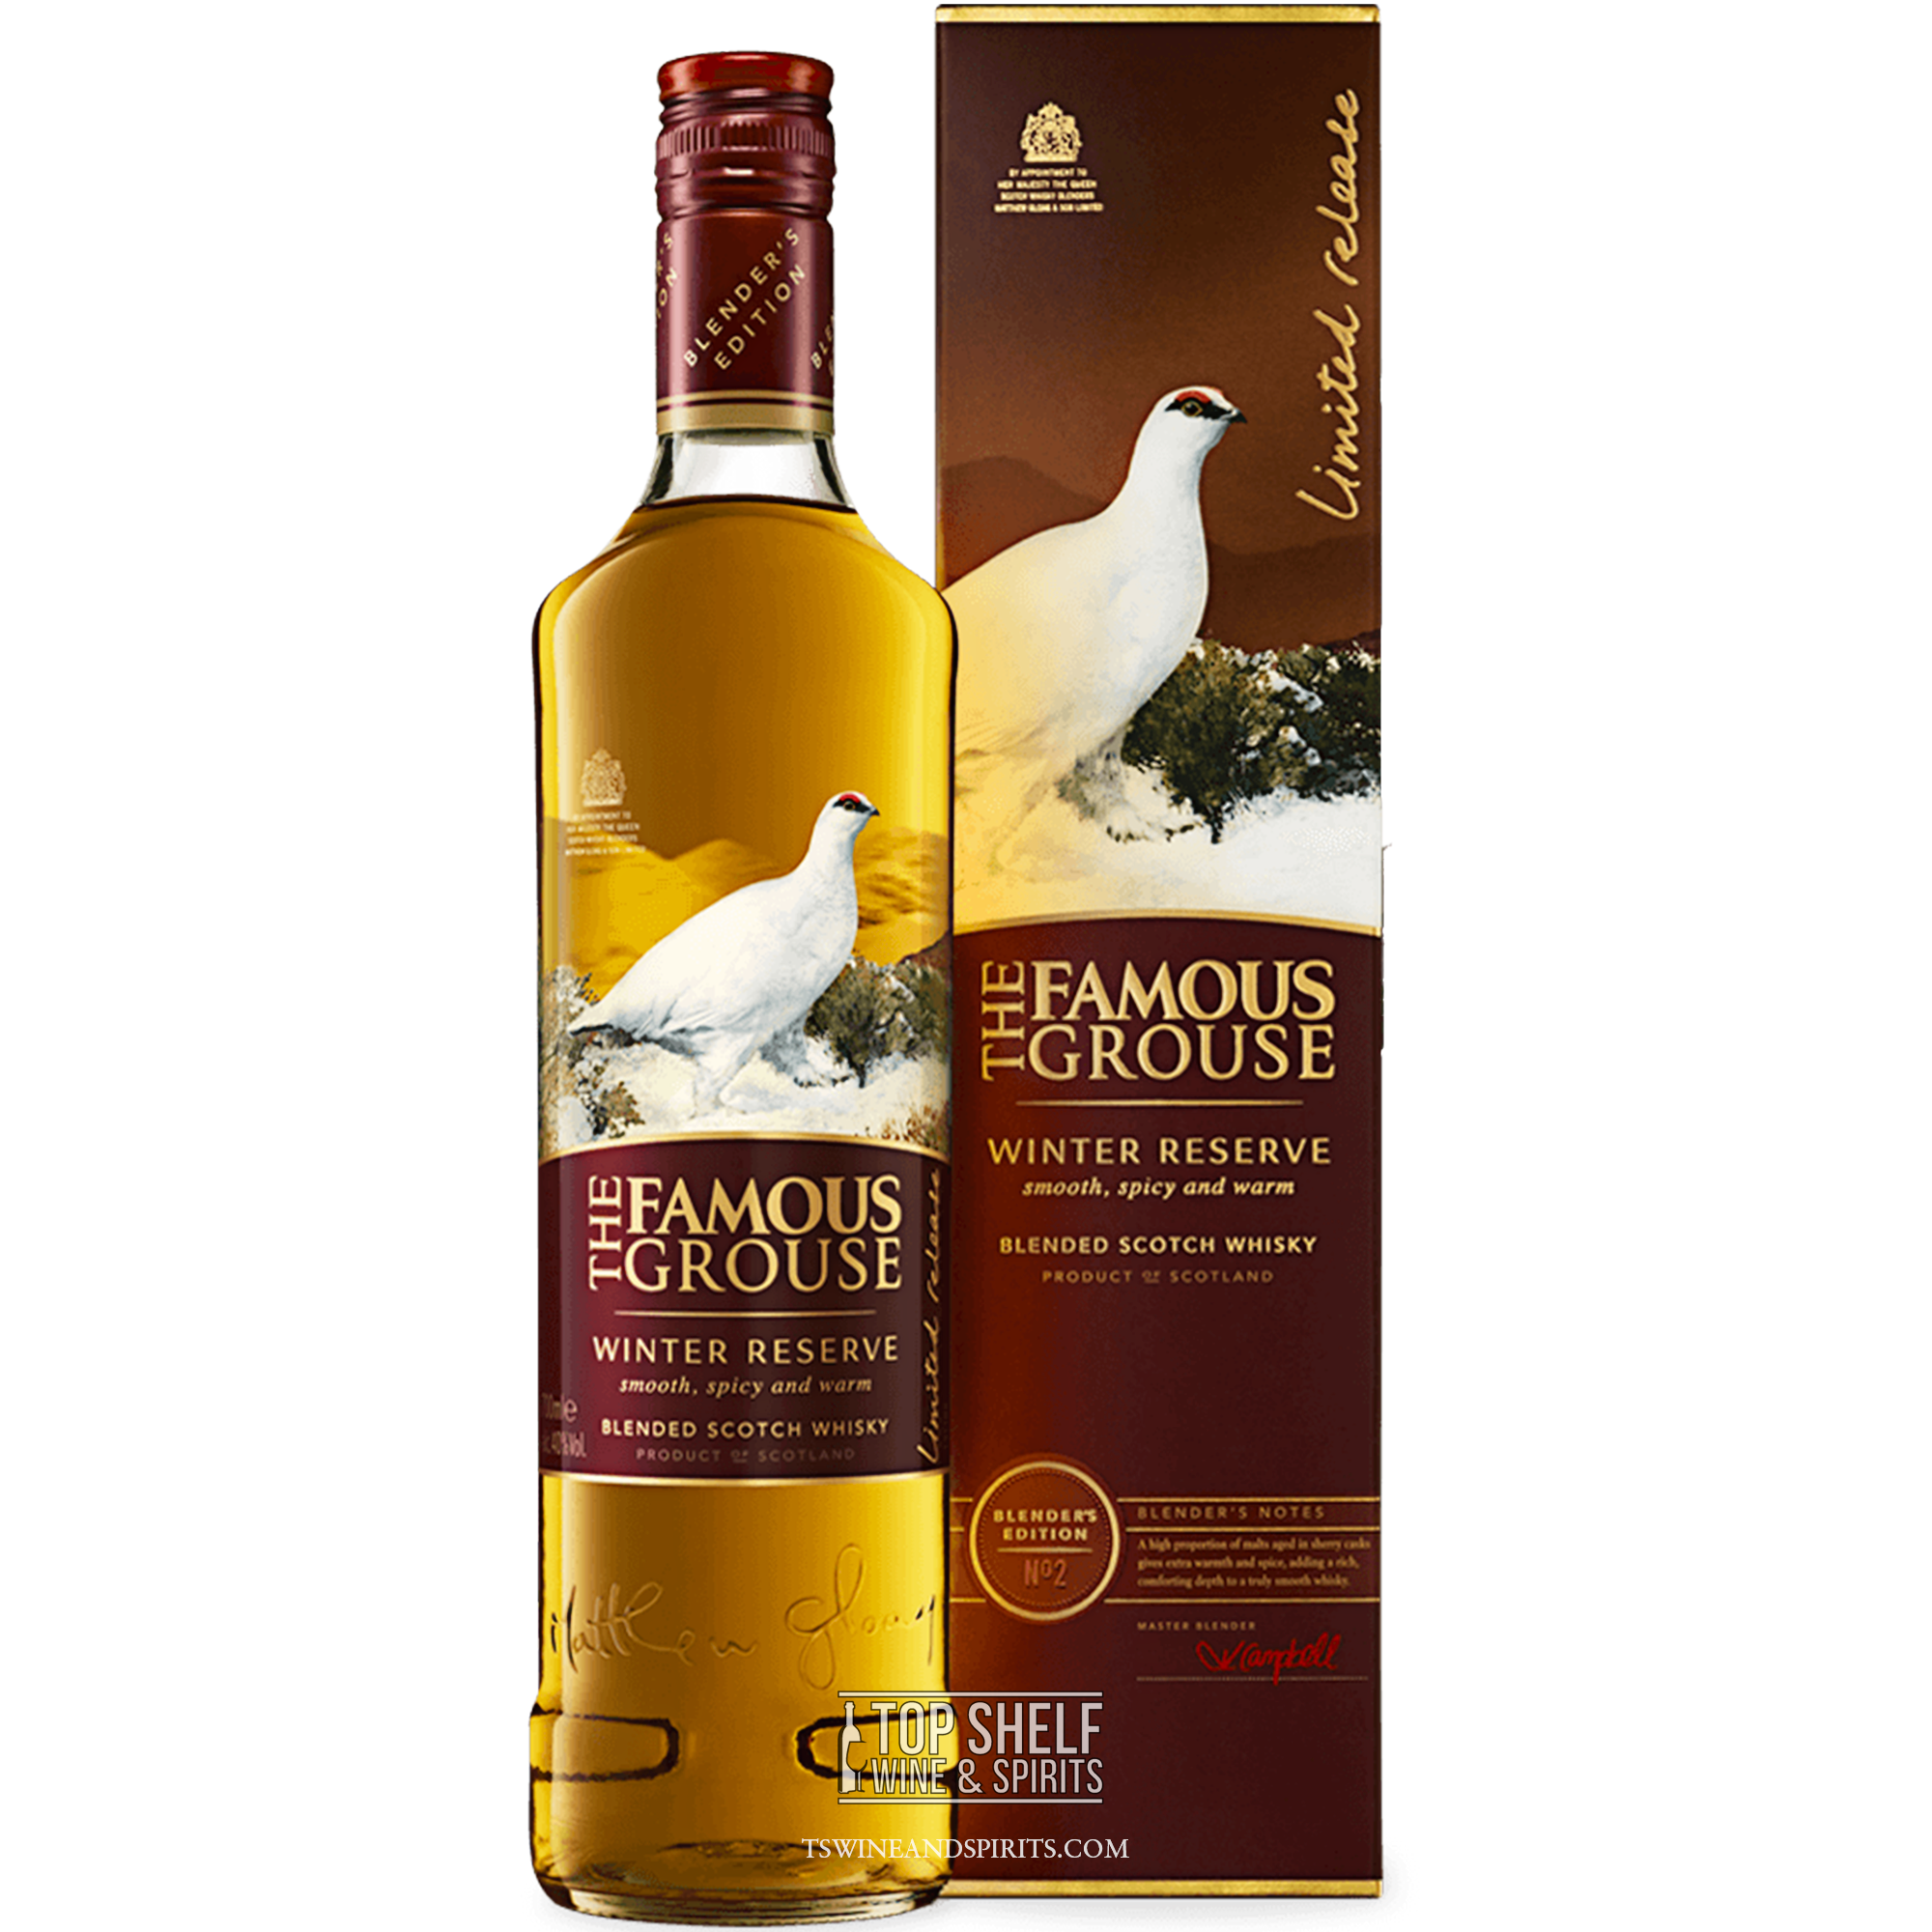 The Famous Grouse Winter Reserve Scotch